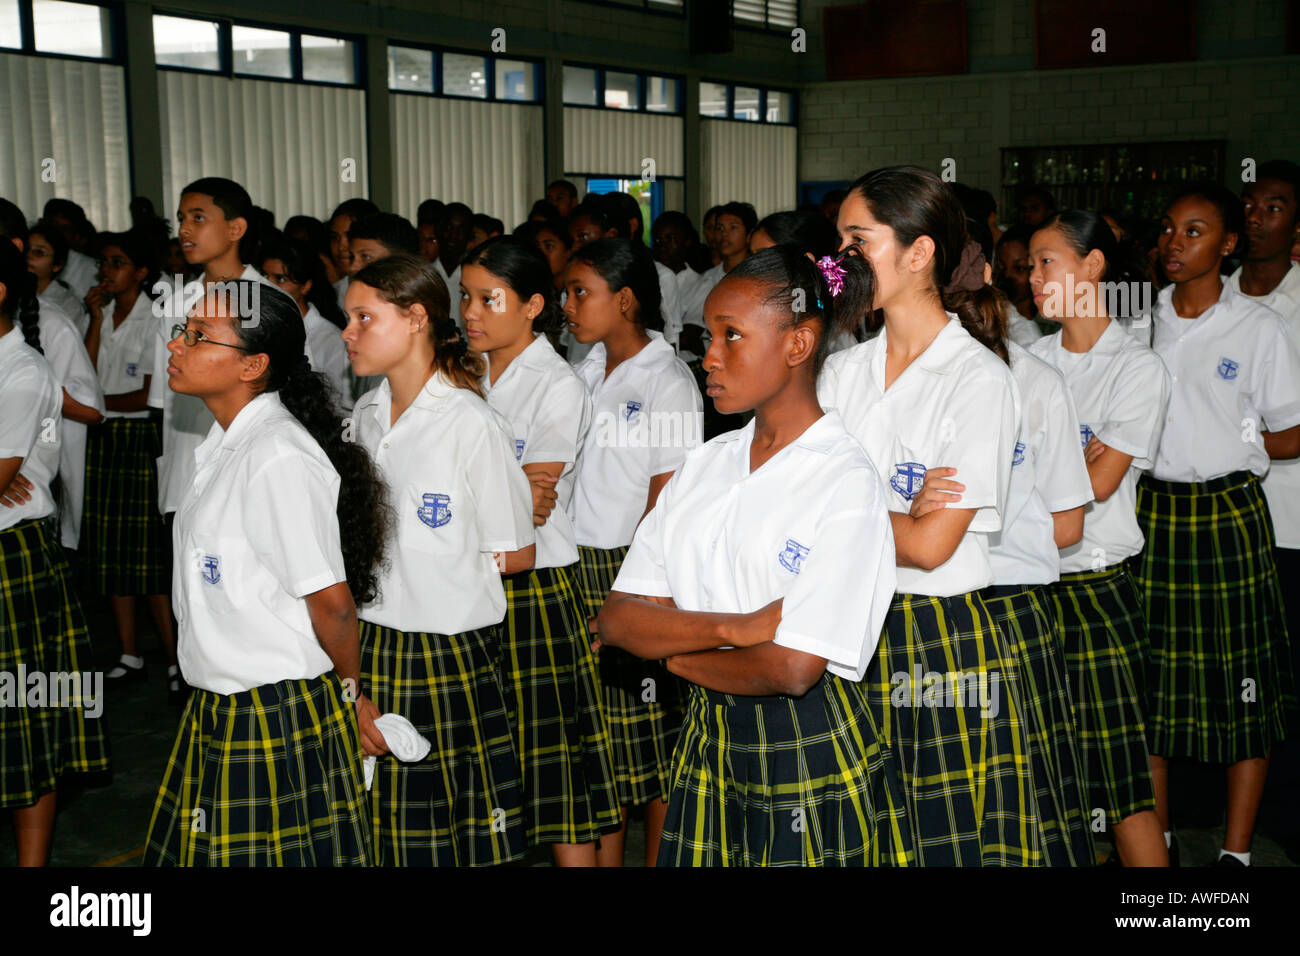 Students assembled in a room at an Ursuline convent and orphanage in Georgetown, Guyana, South America Stock Photo